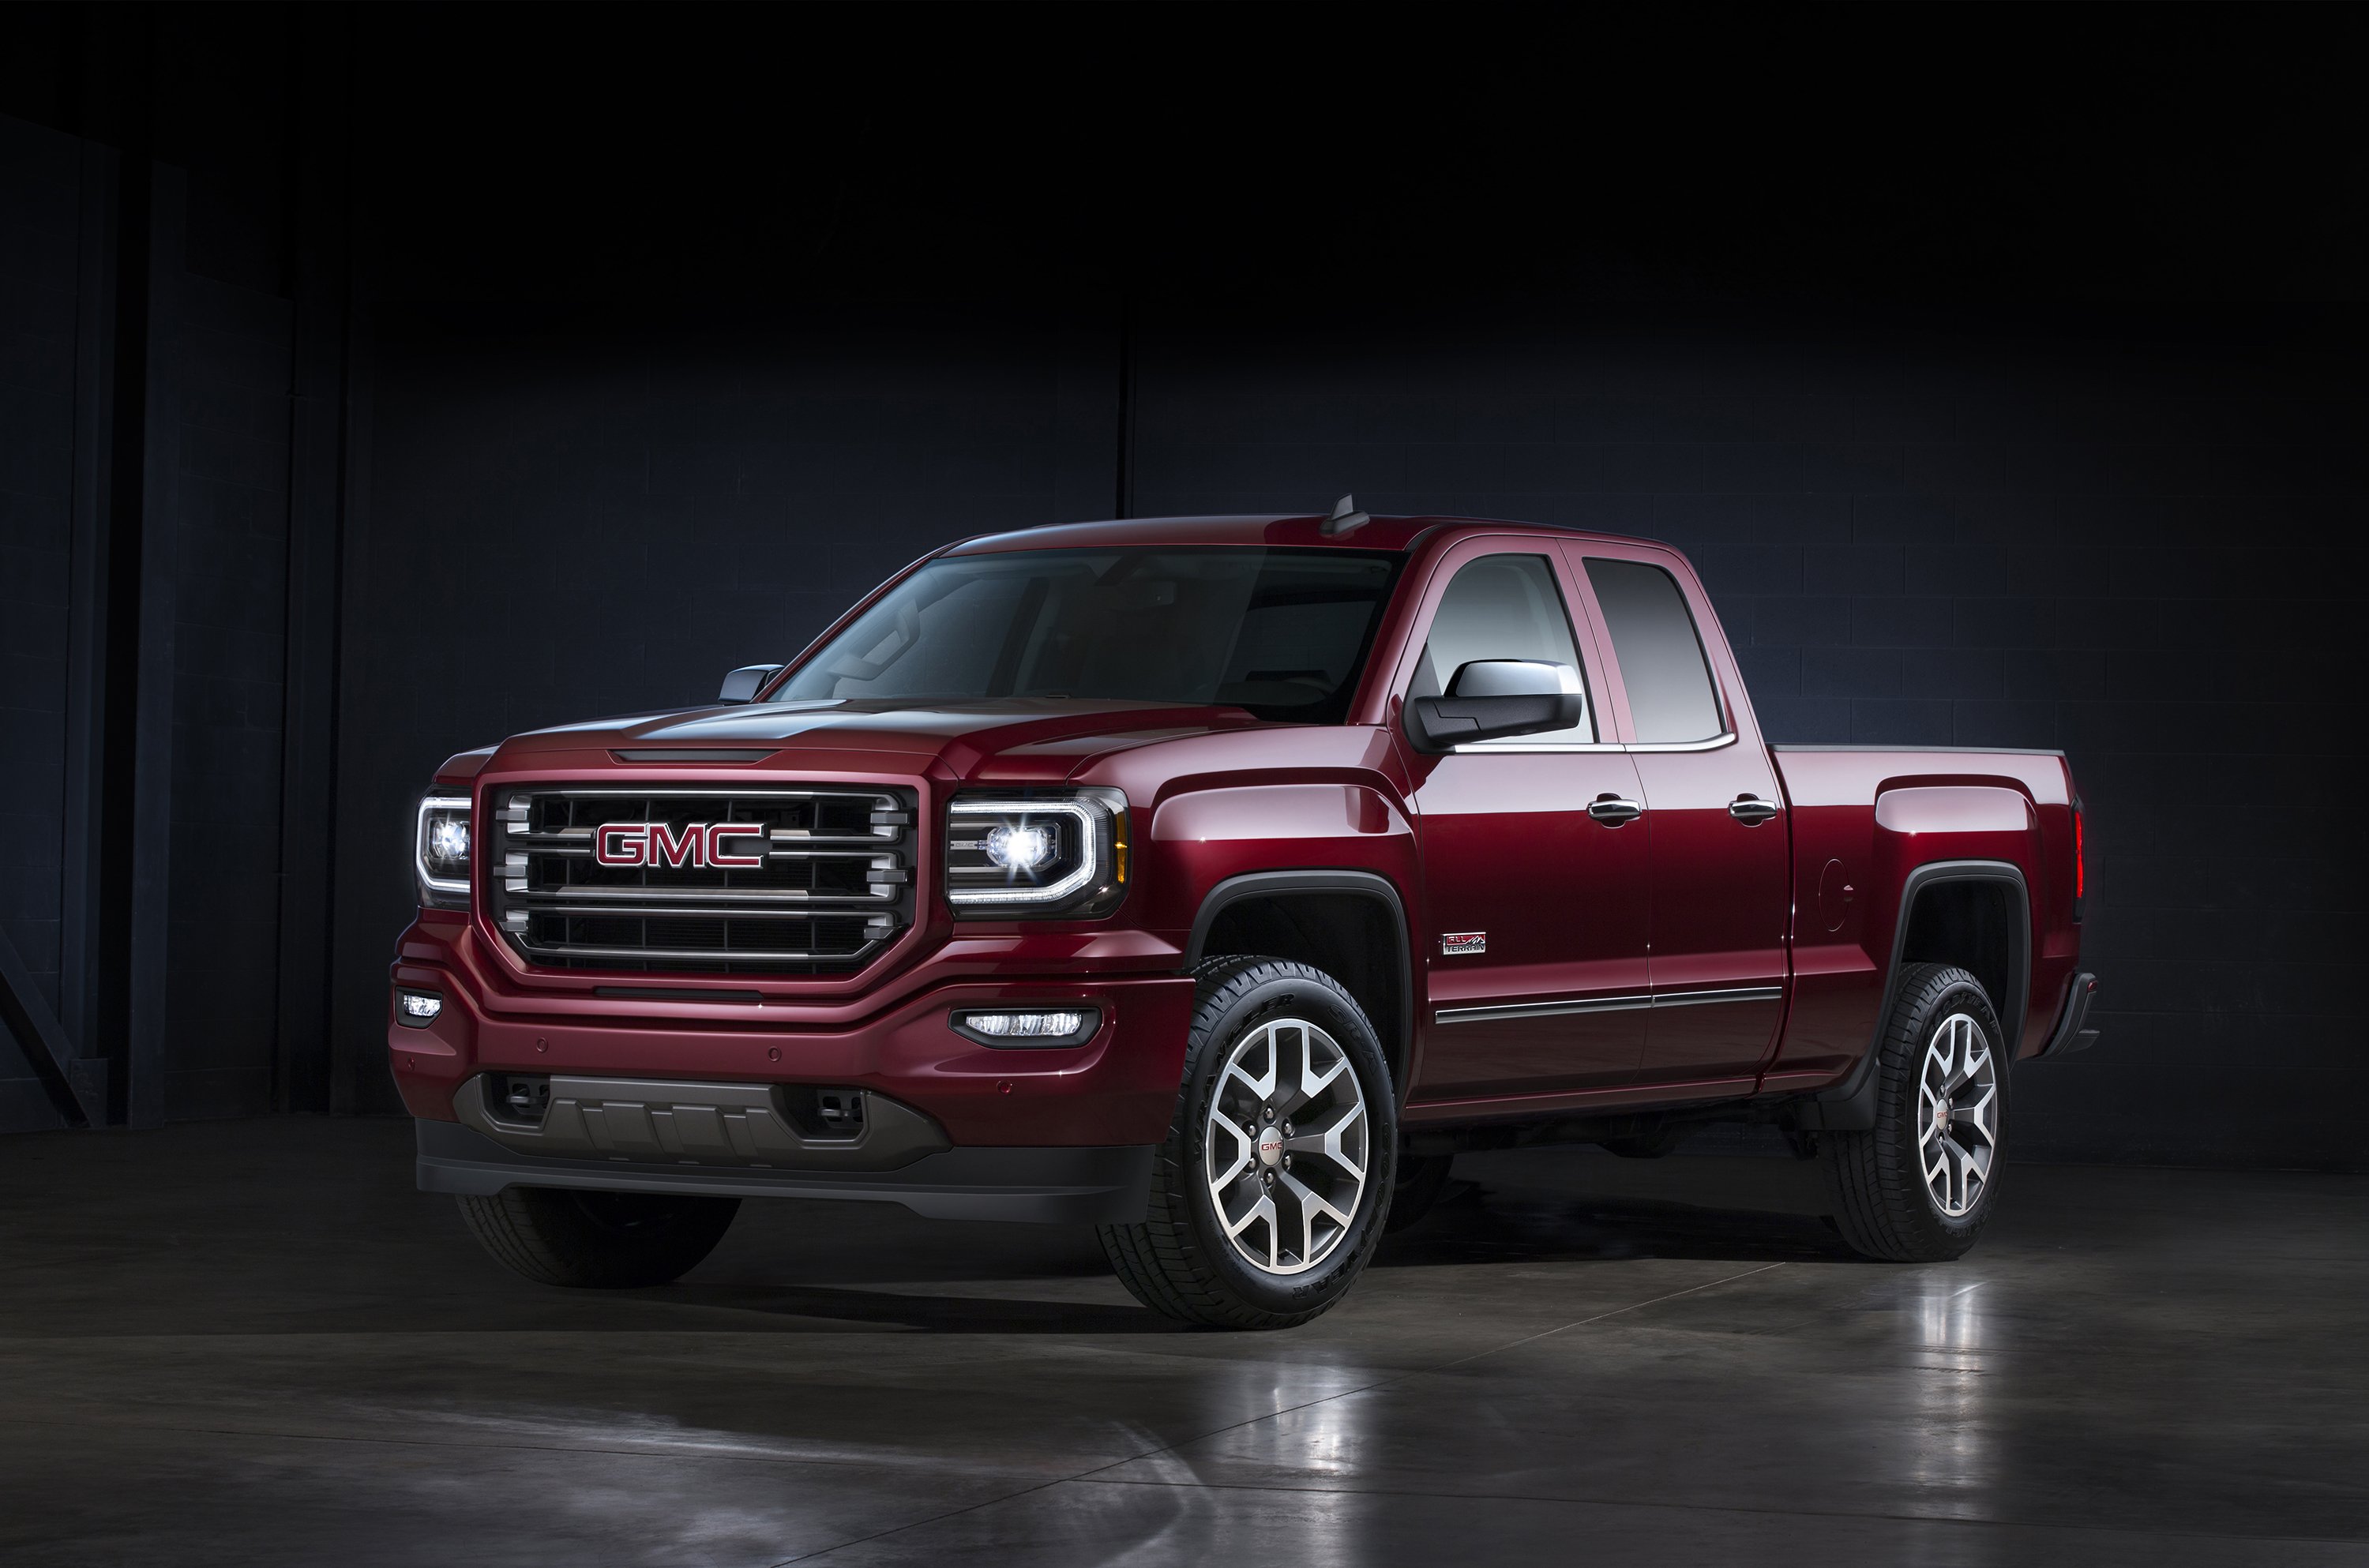 2016, Gmc, Sierra, All, Terrain, 1500, Double, Cab, Pickup, Truck Wallpapers  HD / Desktop and Mobile Backgrounds